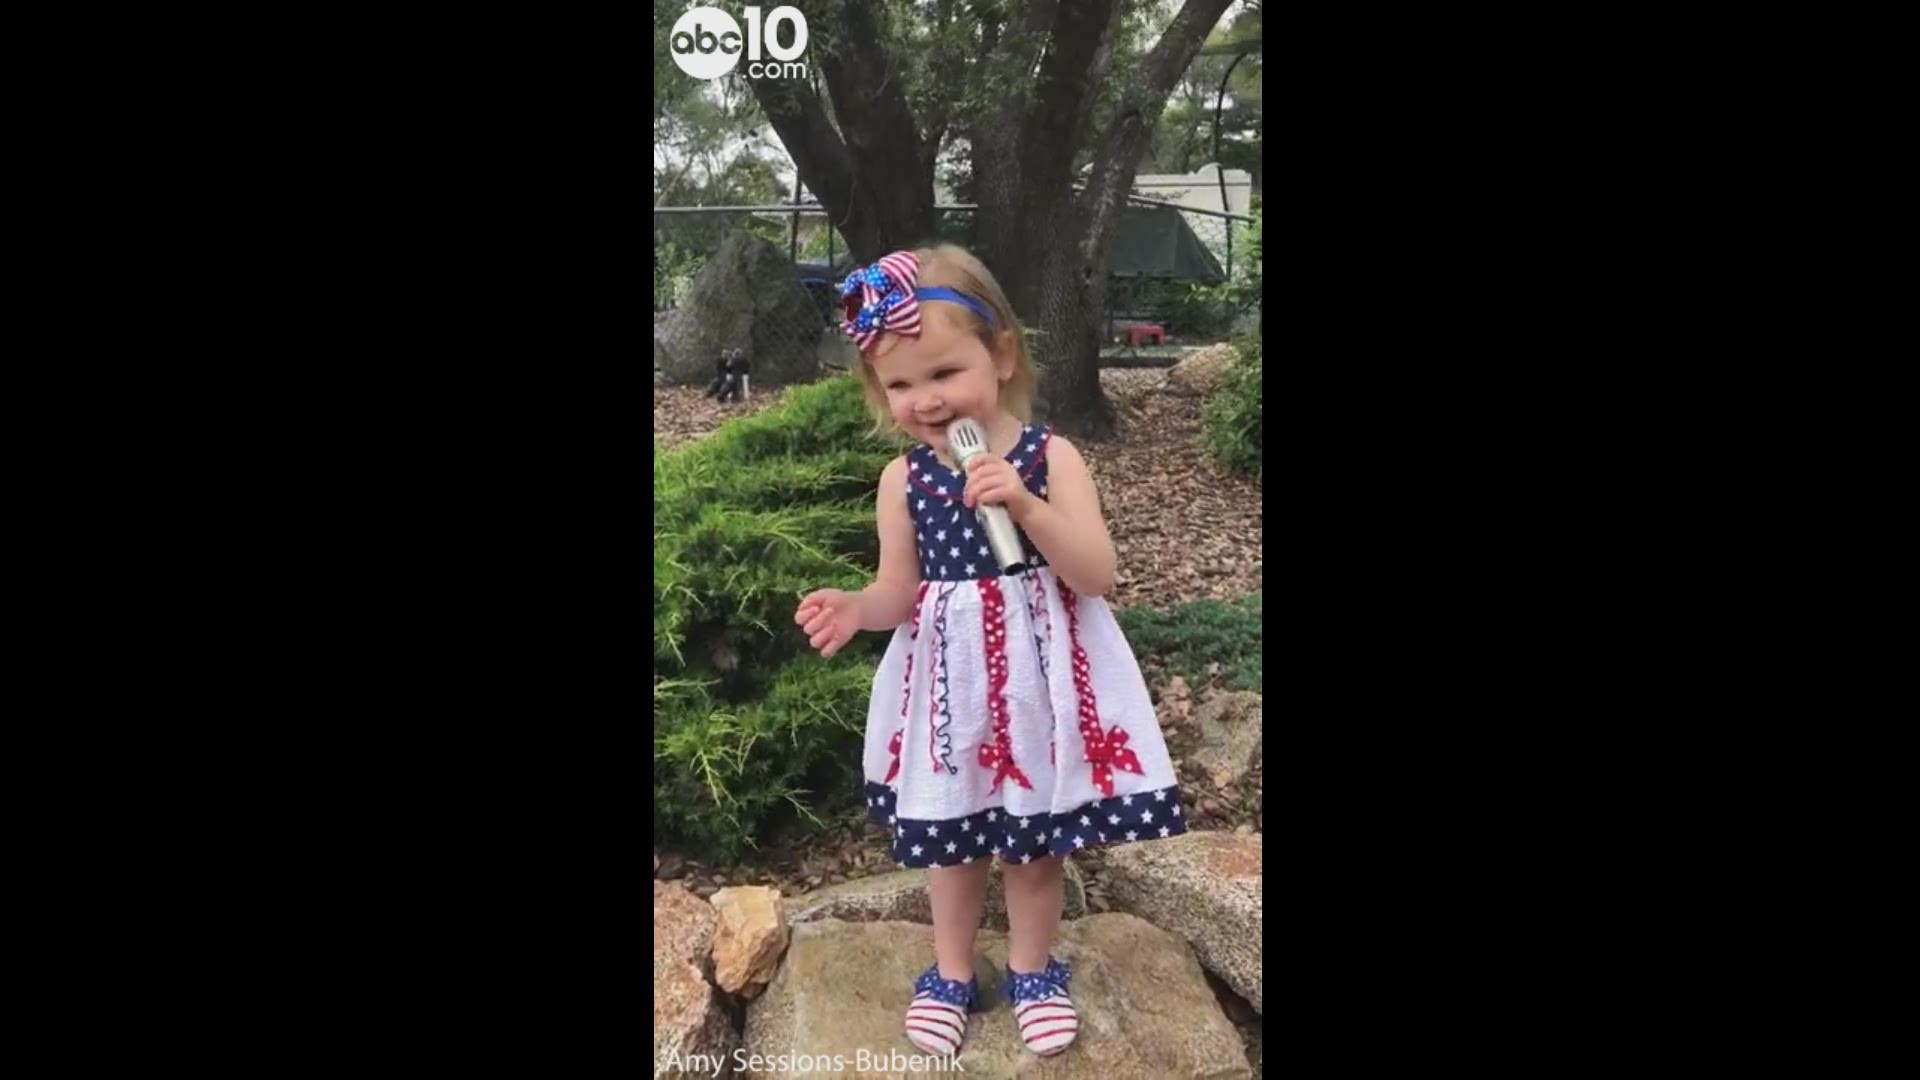 2-year-old Amelia Bubenik sings the National Anthem in honor of Memorial Day.